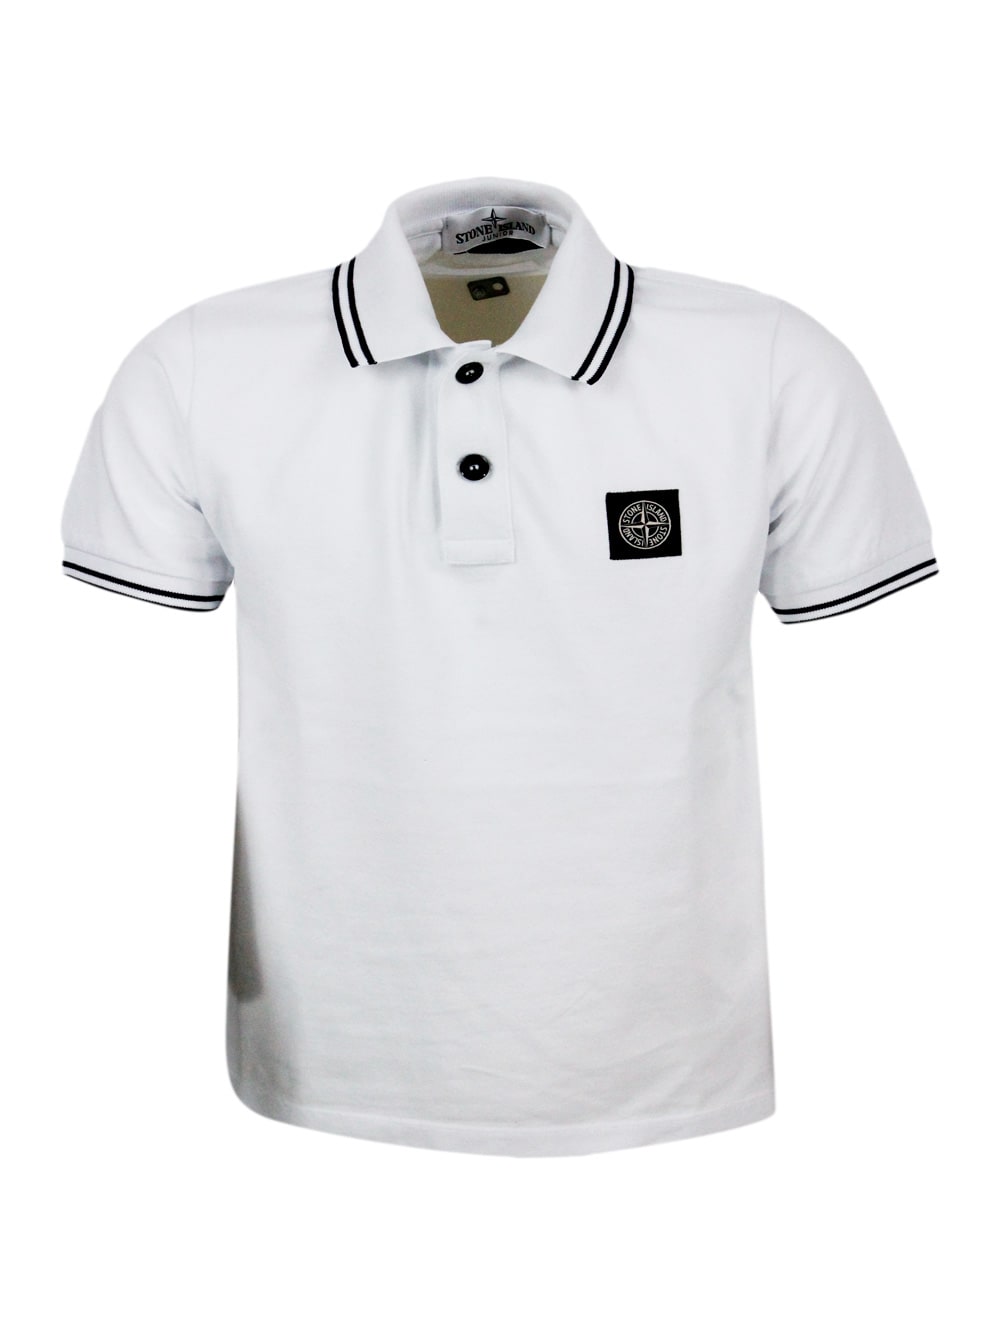 Stone Island Kids' Short-sleeved Pique Cotton Polo Shirt With Contrasting Color Profiles On The Collar And Sleeve. Logo In White